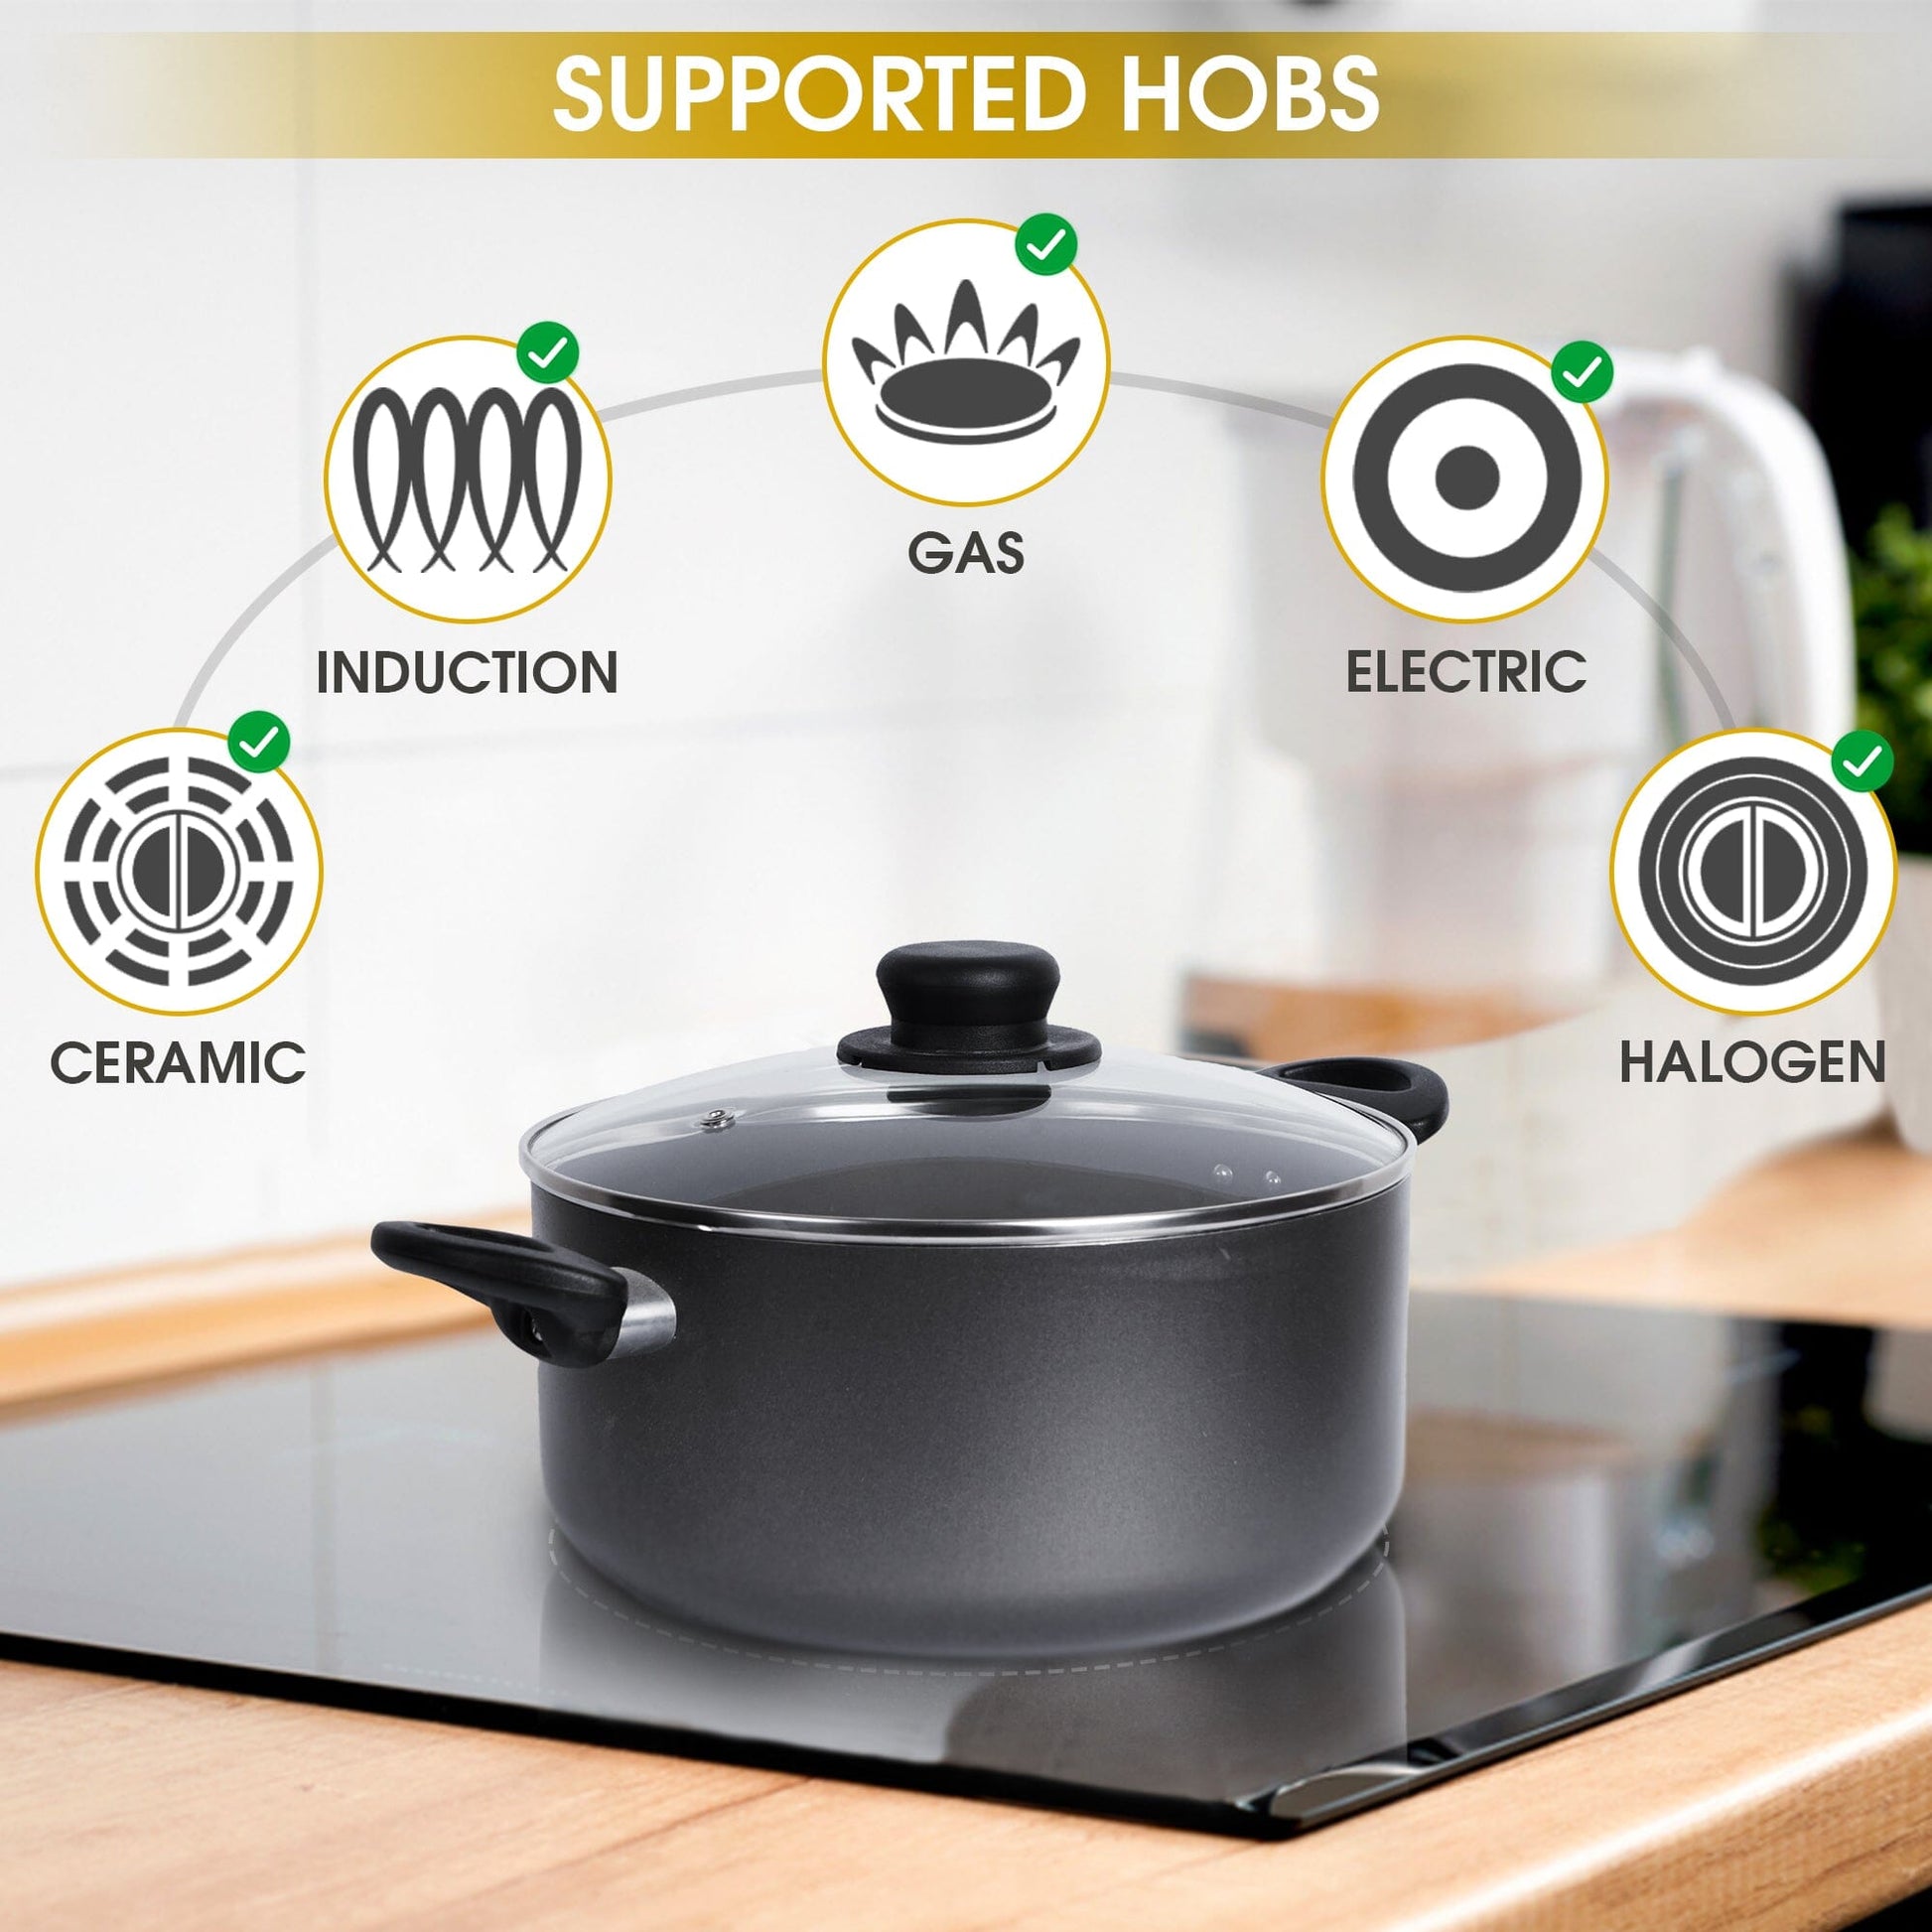 Stock Pot Non-Stick Kitchen Cooking Pot with Glass Lid and Silicon Trivet Mat - Induction Base Aluminum Pot Cooking Homatz 